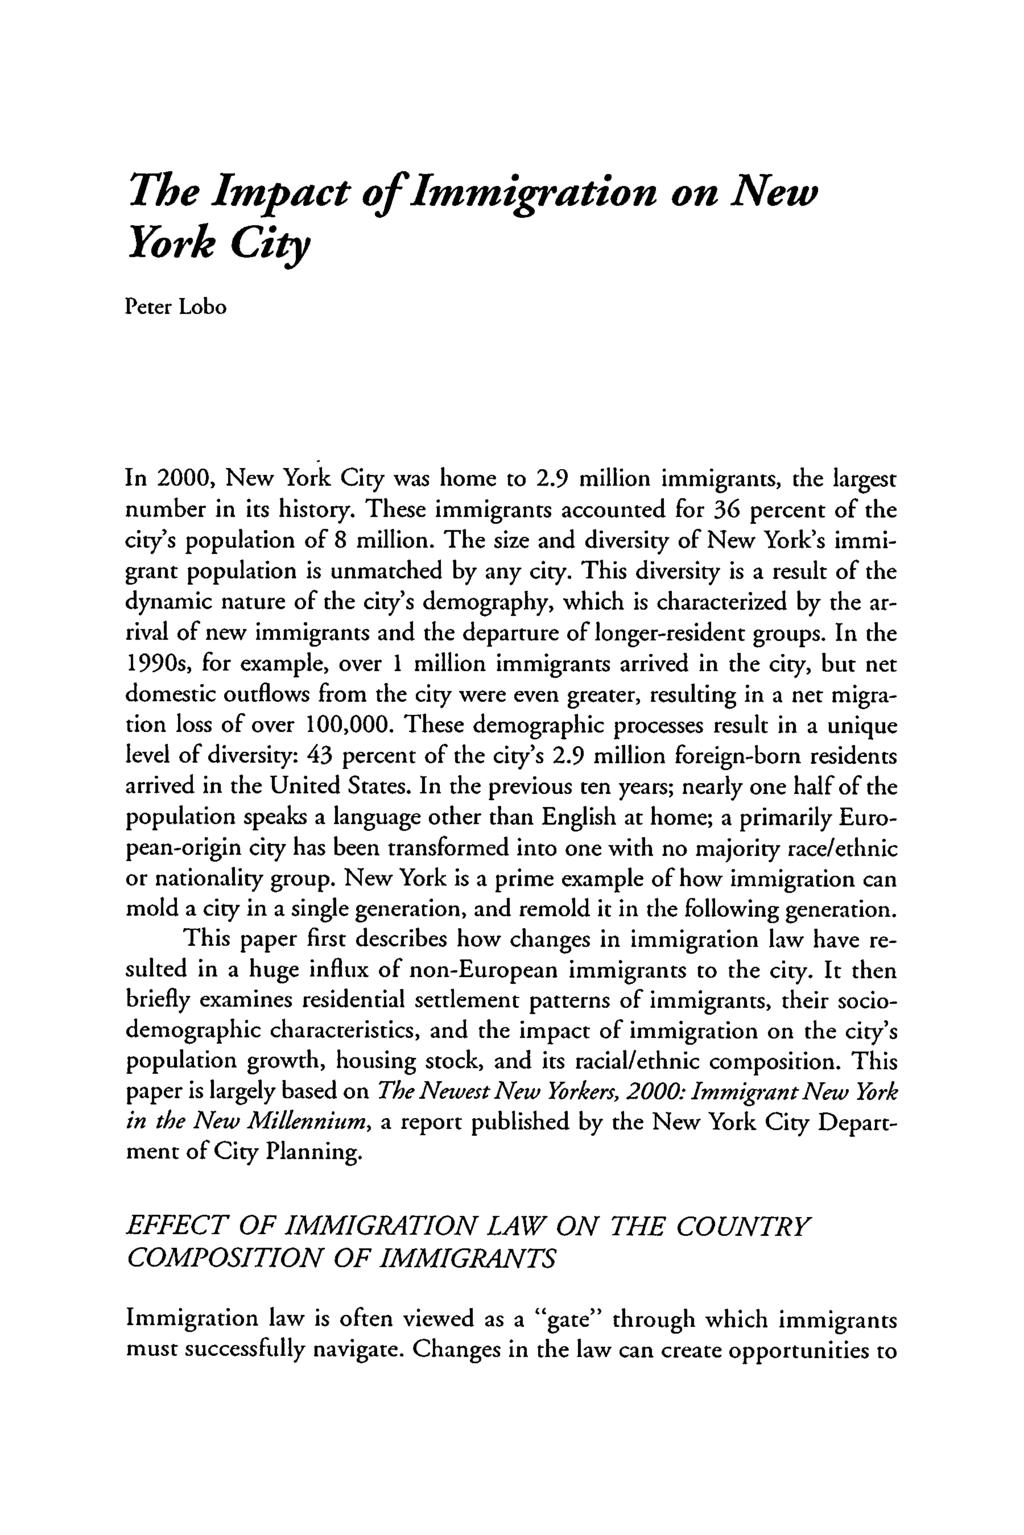 The Impact of Immi ation York City on New Peter Lob0 In 2000, New York City was home to 2.9 million immigrants, the largest number in its history.